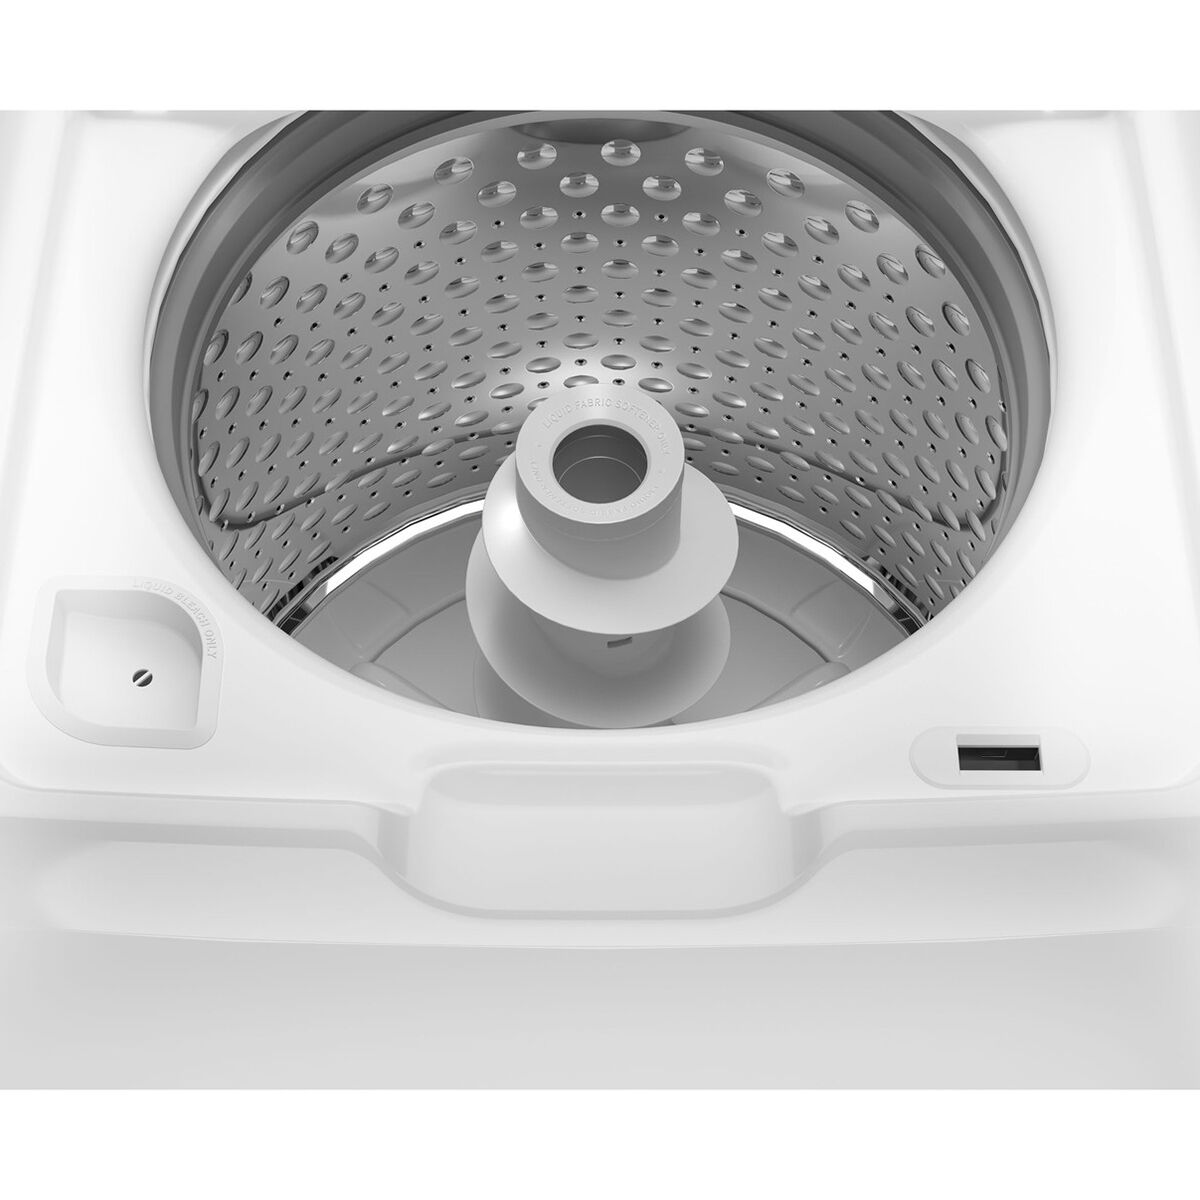 GE 27 in. 4.5 cu. ft. Top Load Washer with Spanish Panel, Wash Modes Soak,  Power, True Dual-Action Agitator & Sanitize with Oxi - White